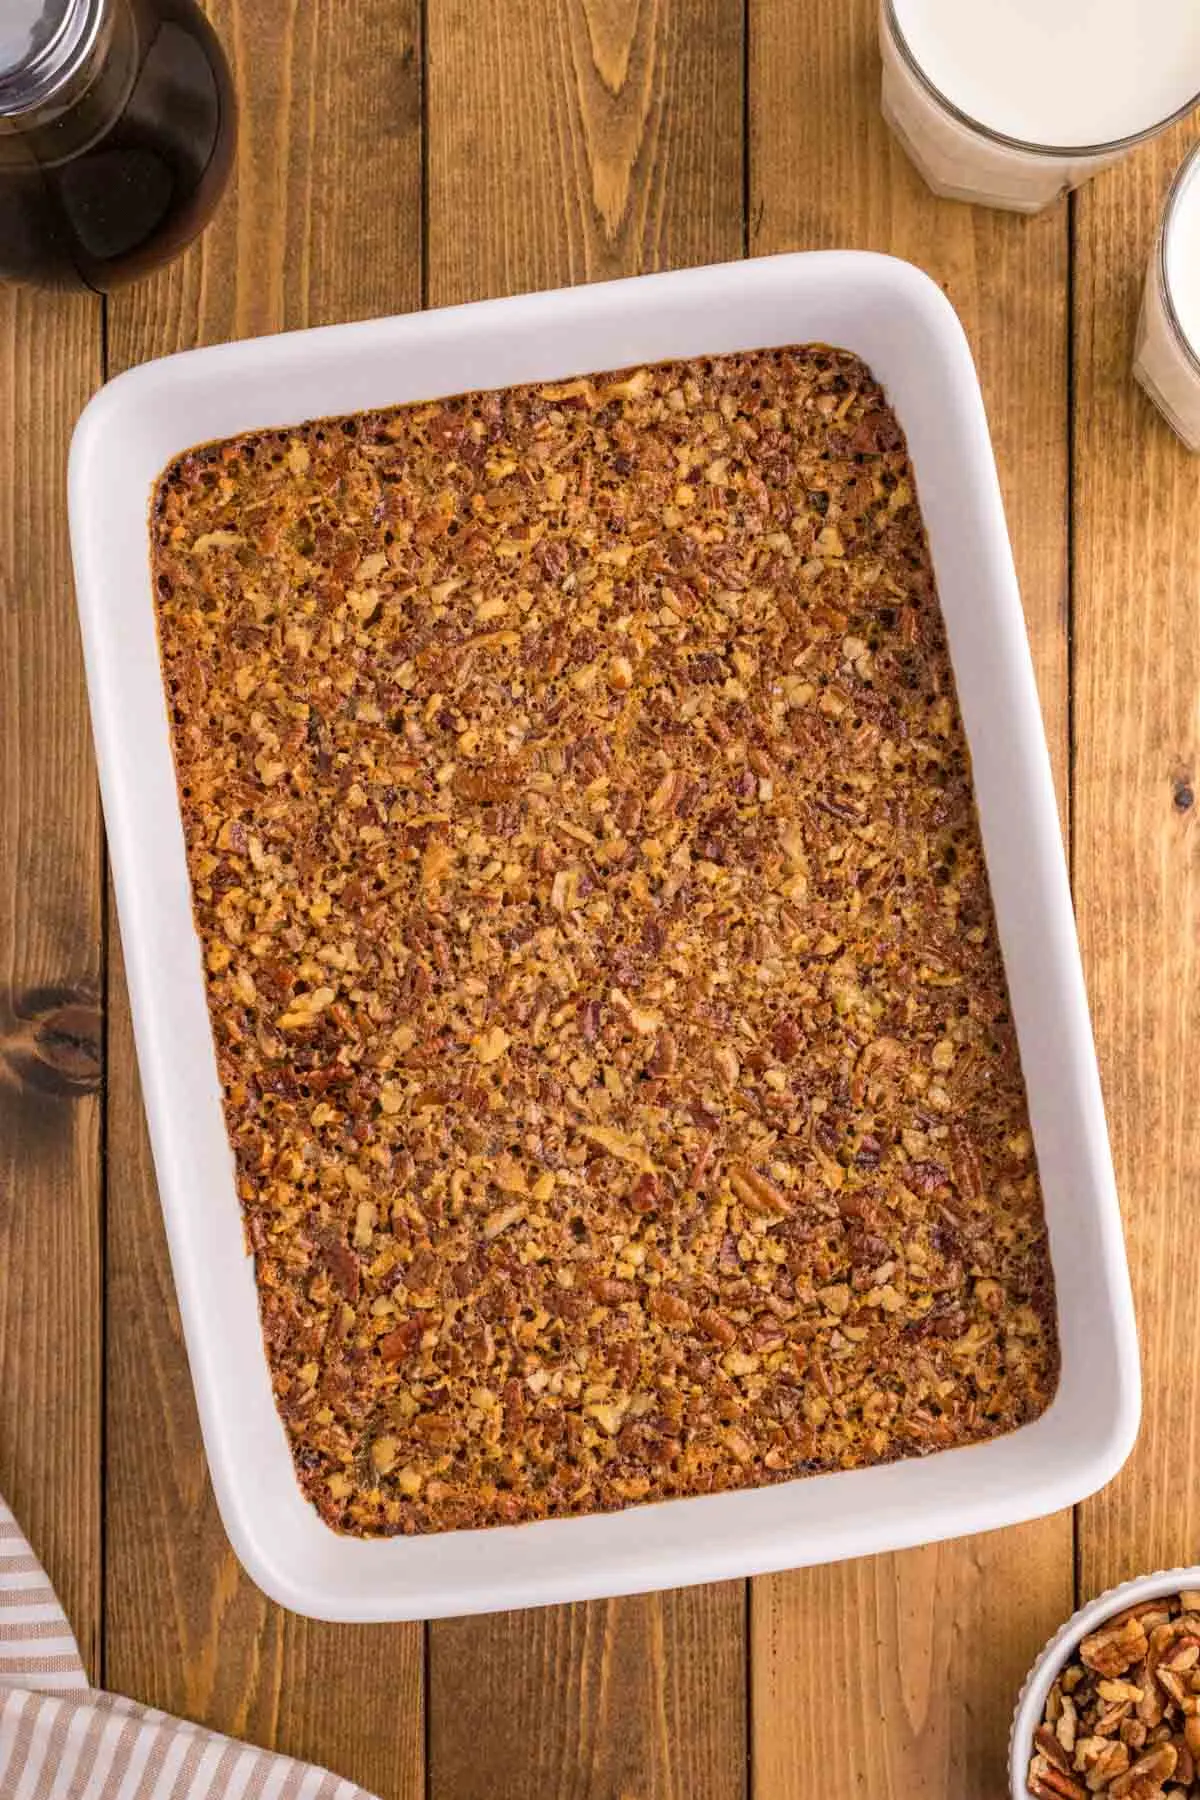 Pecan Pie Bars are delicious dessert bars with a shortbread base topped with a pecan pie filling layer made with eggs, maple syrup, corn syrup, brown sugar, butter and chopped pecans.